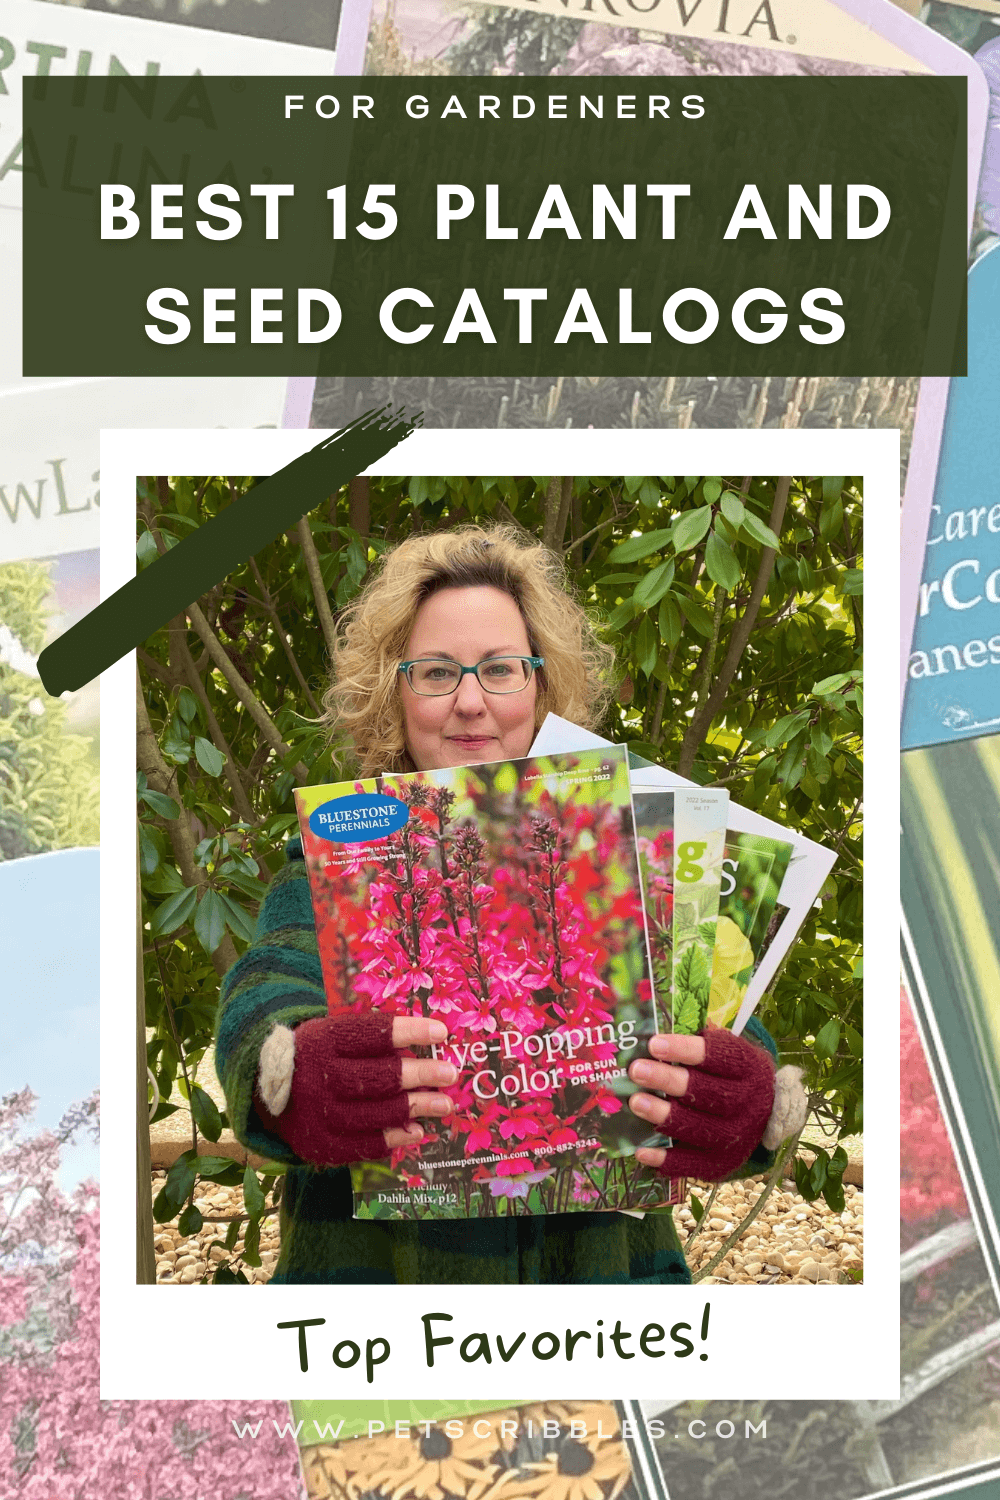 This article and video review my favorite plant and seed catalogs, including fantastic websites that are a wealth of plant and seed knowledge! There is something for every level of gardener here! via @petscribbles